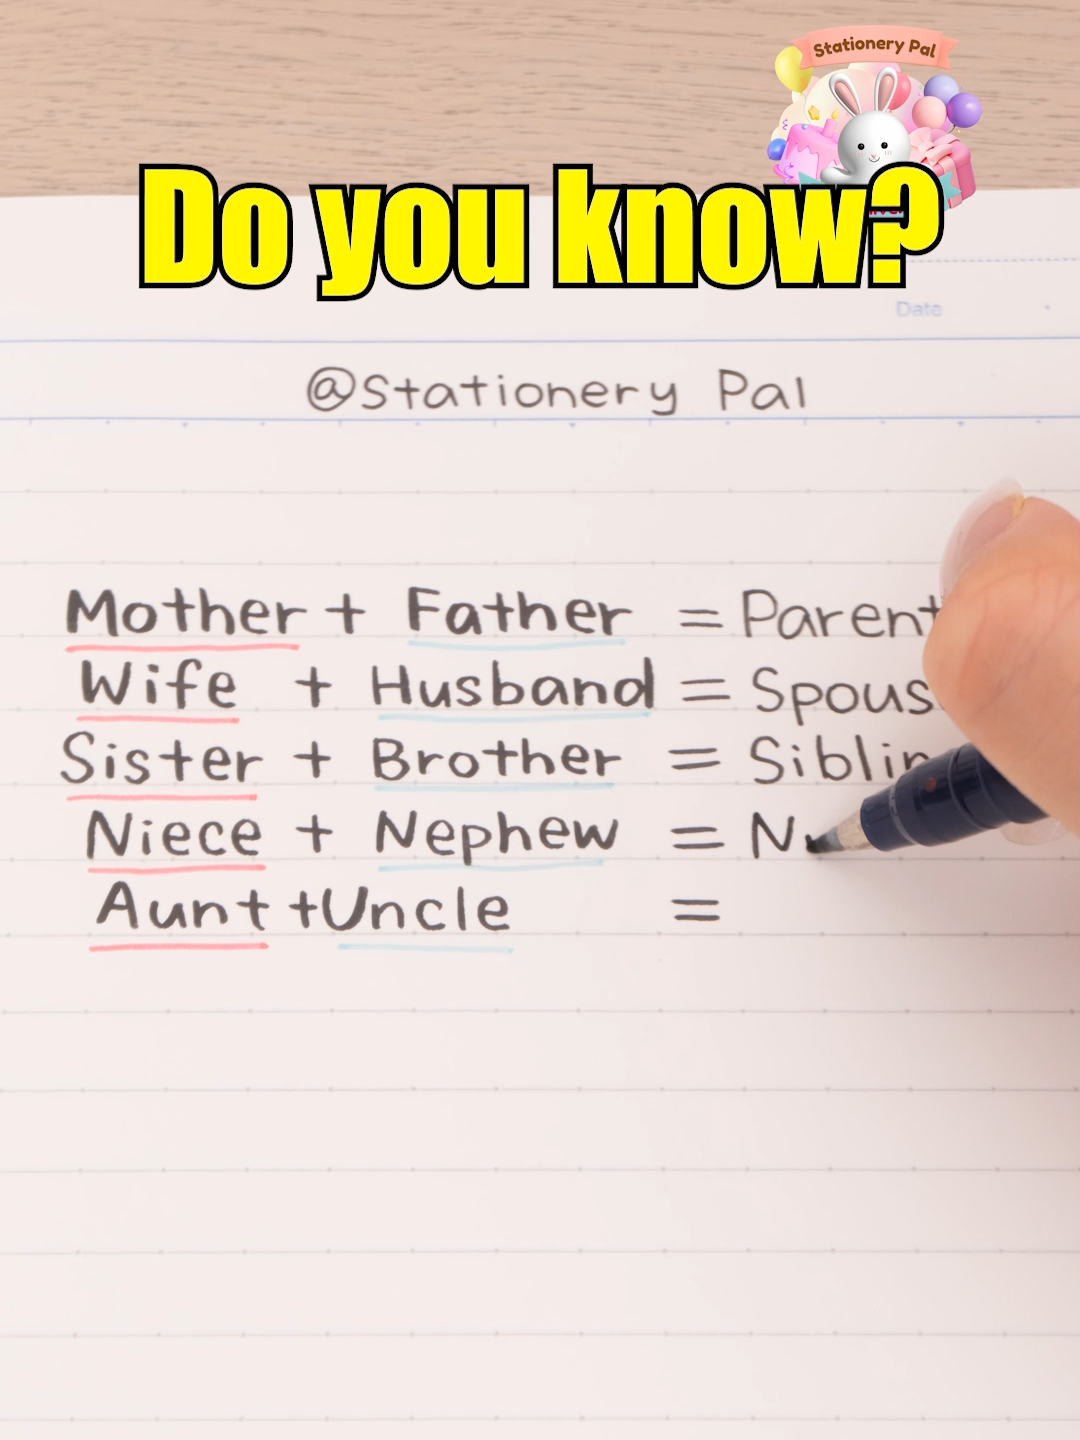 💕Do you know the answer? #stationerypal #fypシ #capcut #funnyvideo #doyouknow